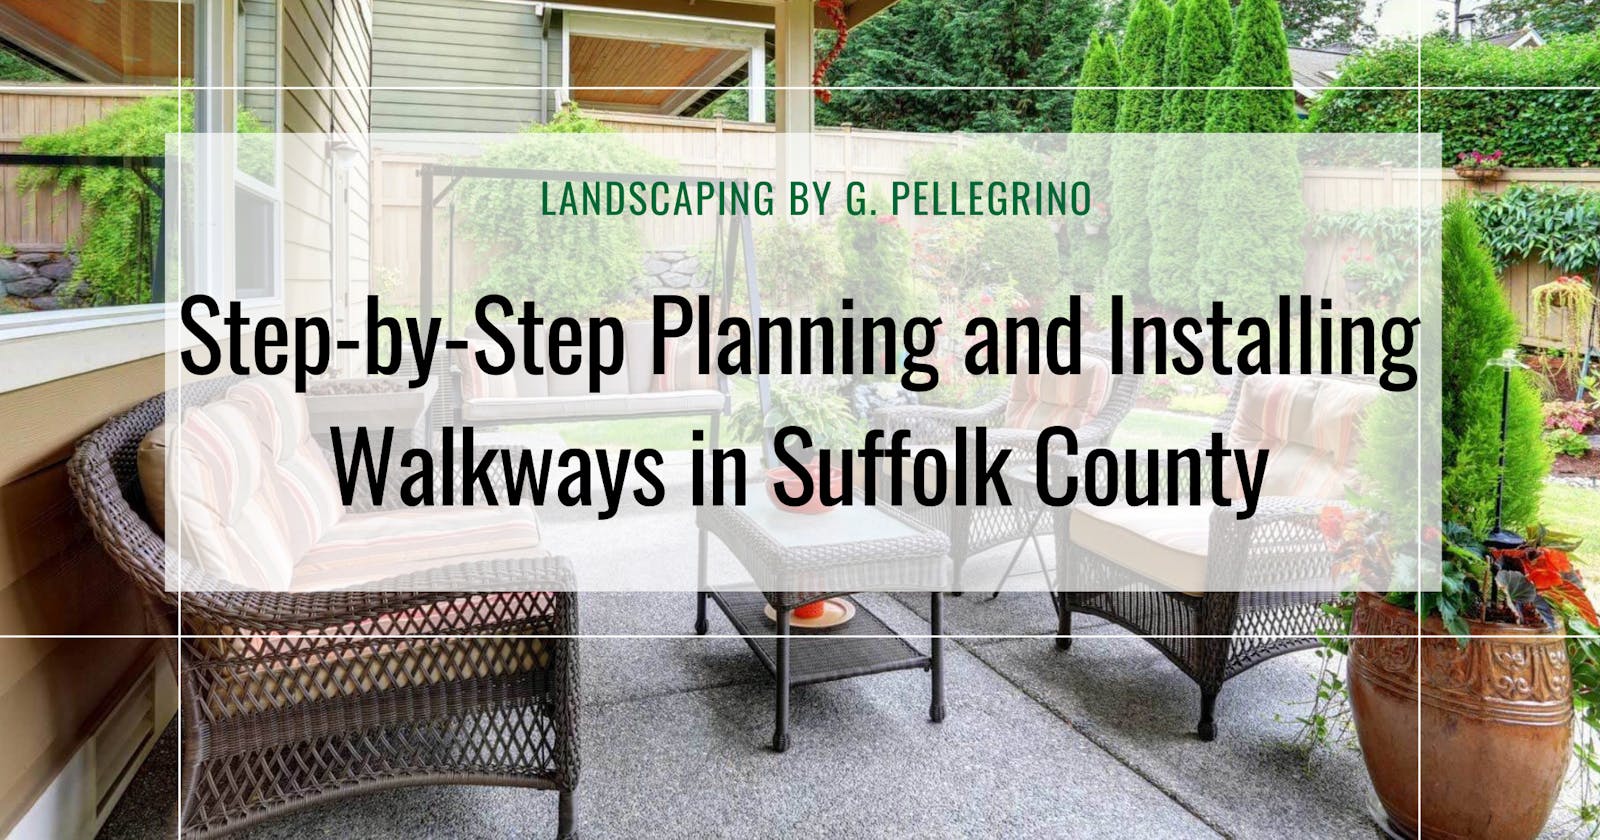 Step-by-Step Planning and Installing Walkways in Suffolk County